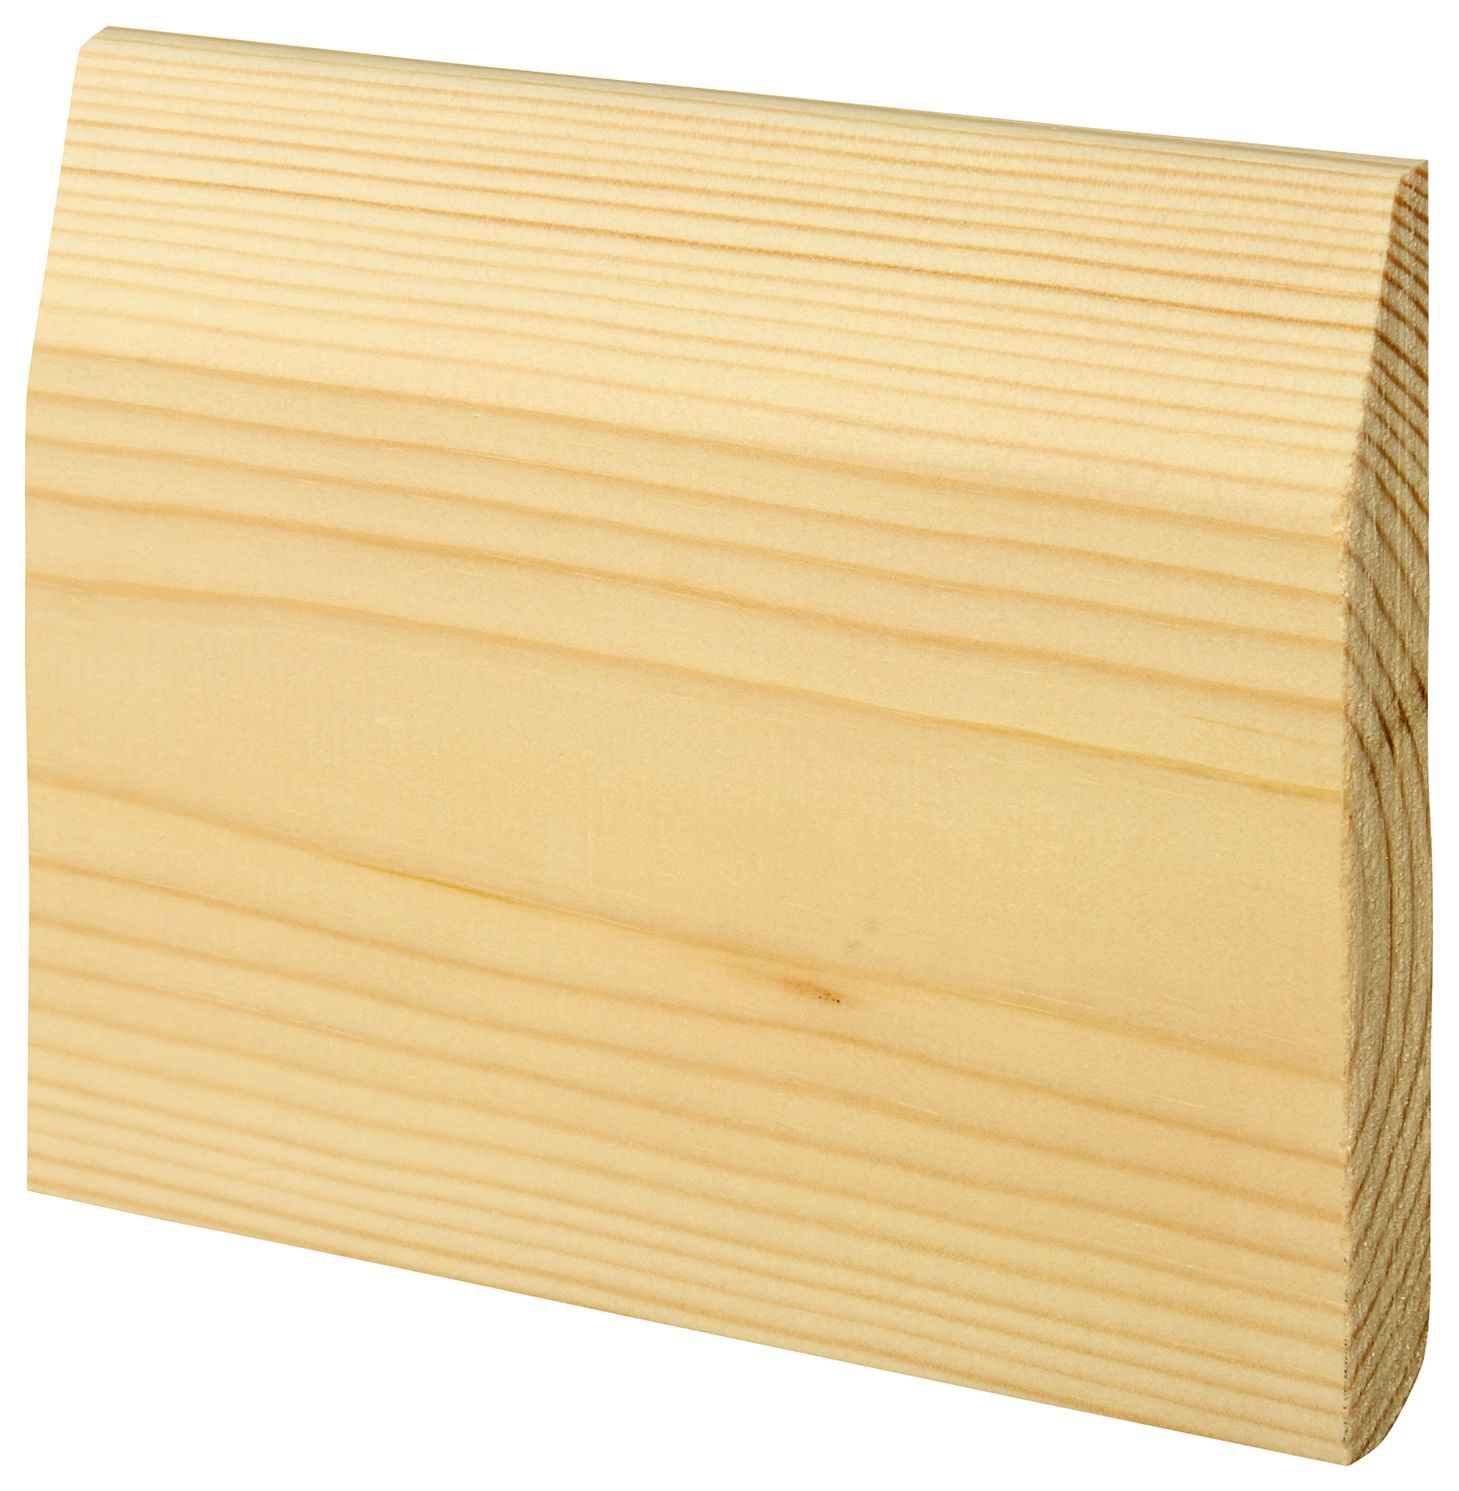 Image of Wickes Chamfered / Bullnose Natural Pine Skirting - 19 x 144 x 4200mm